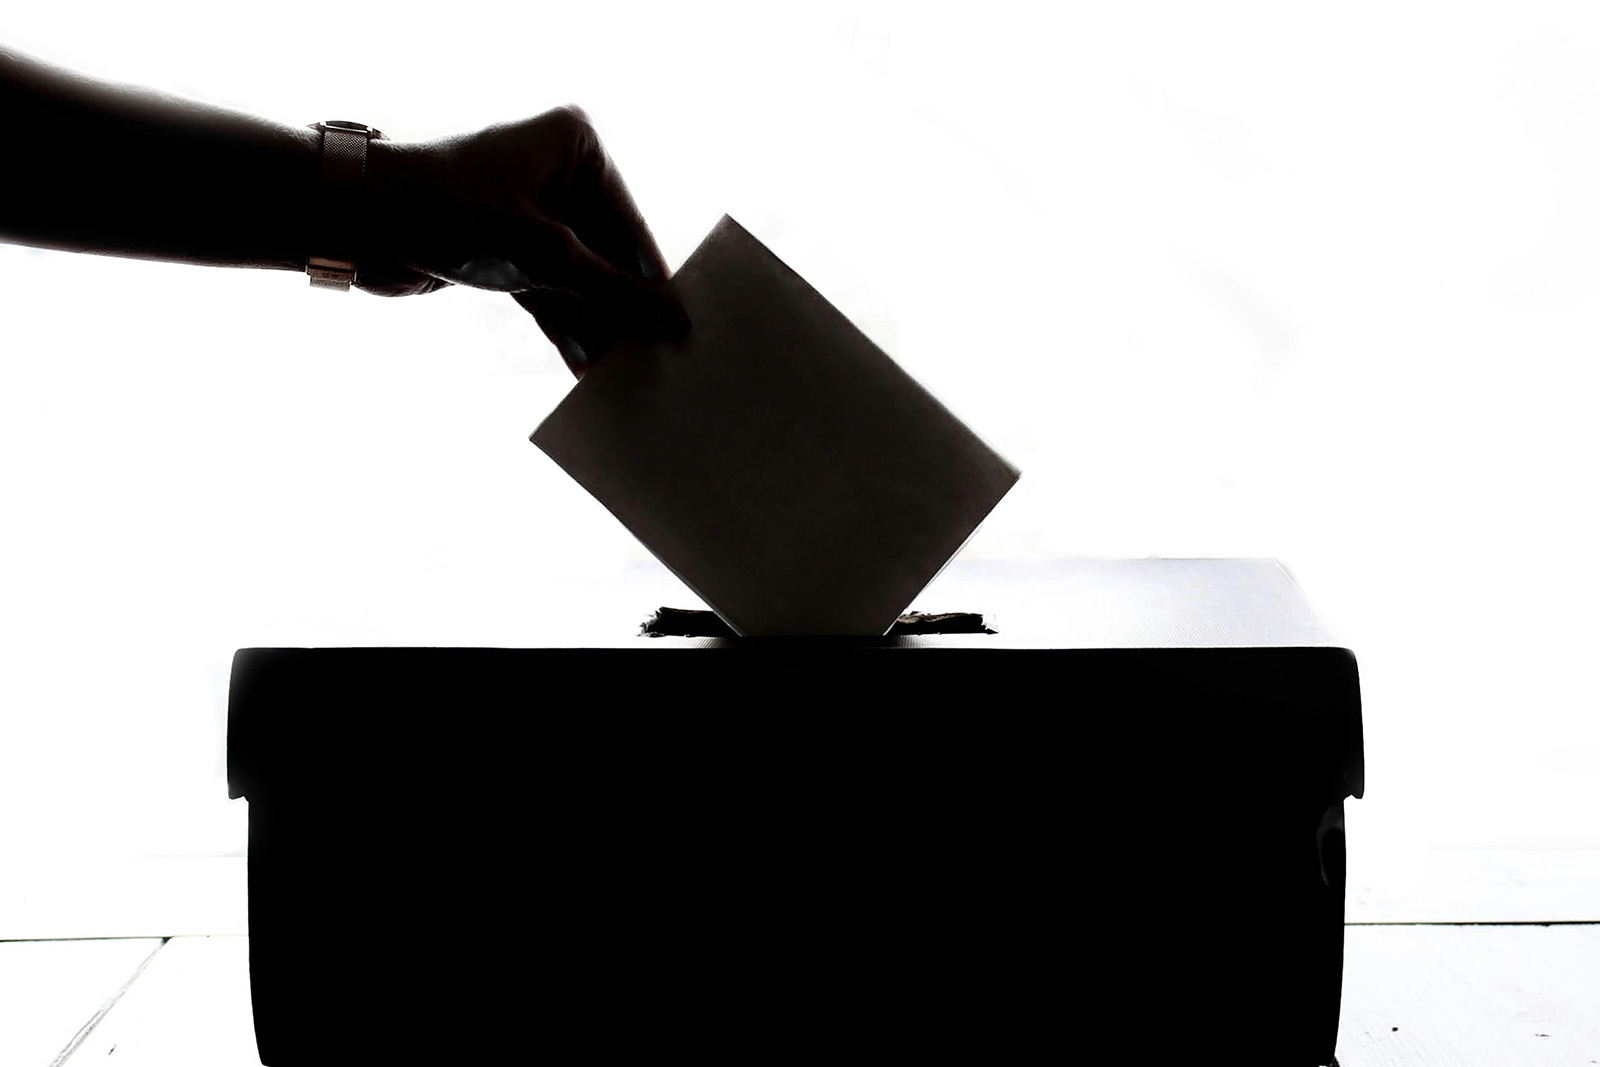 Silhouette of someone putting a ballot in a box